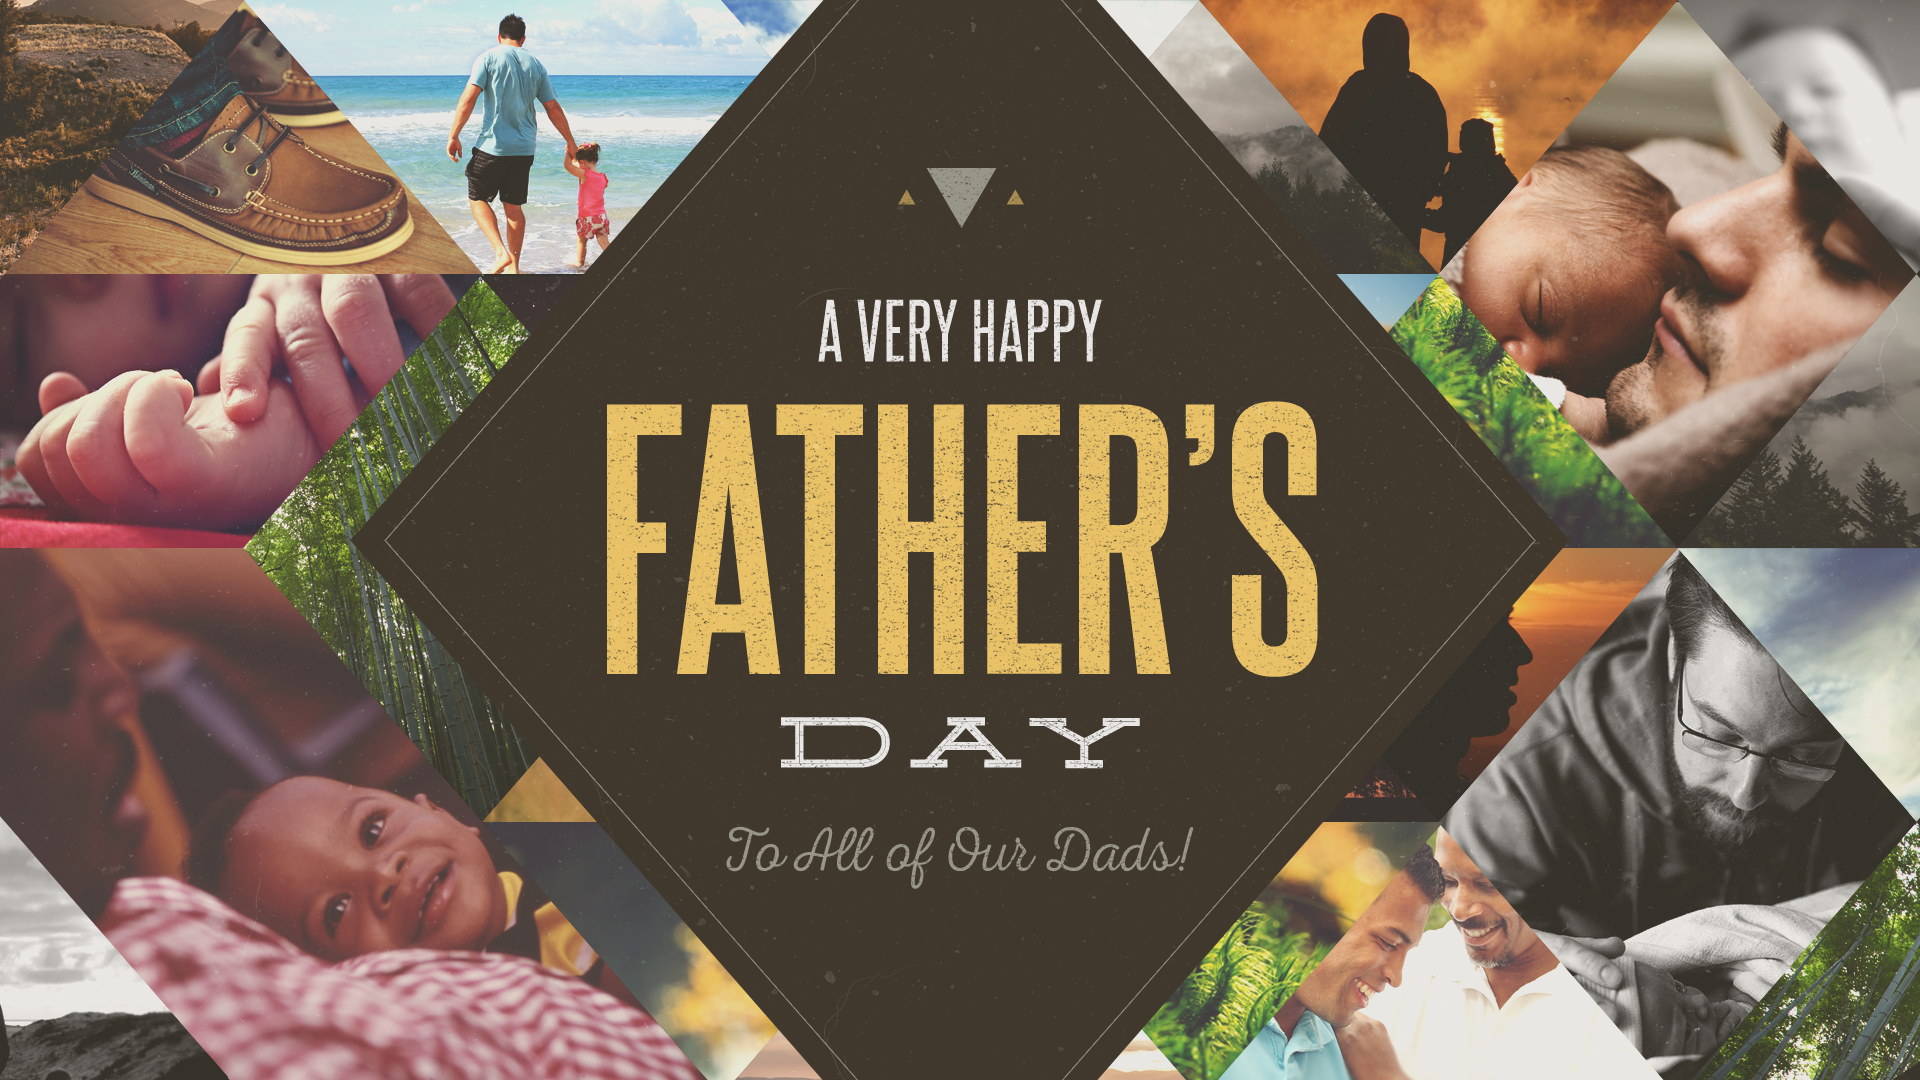 Happy Father’s Day 2018